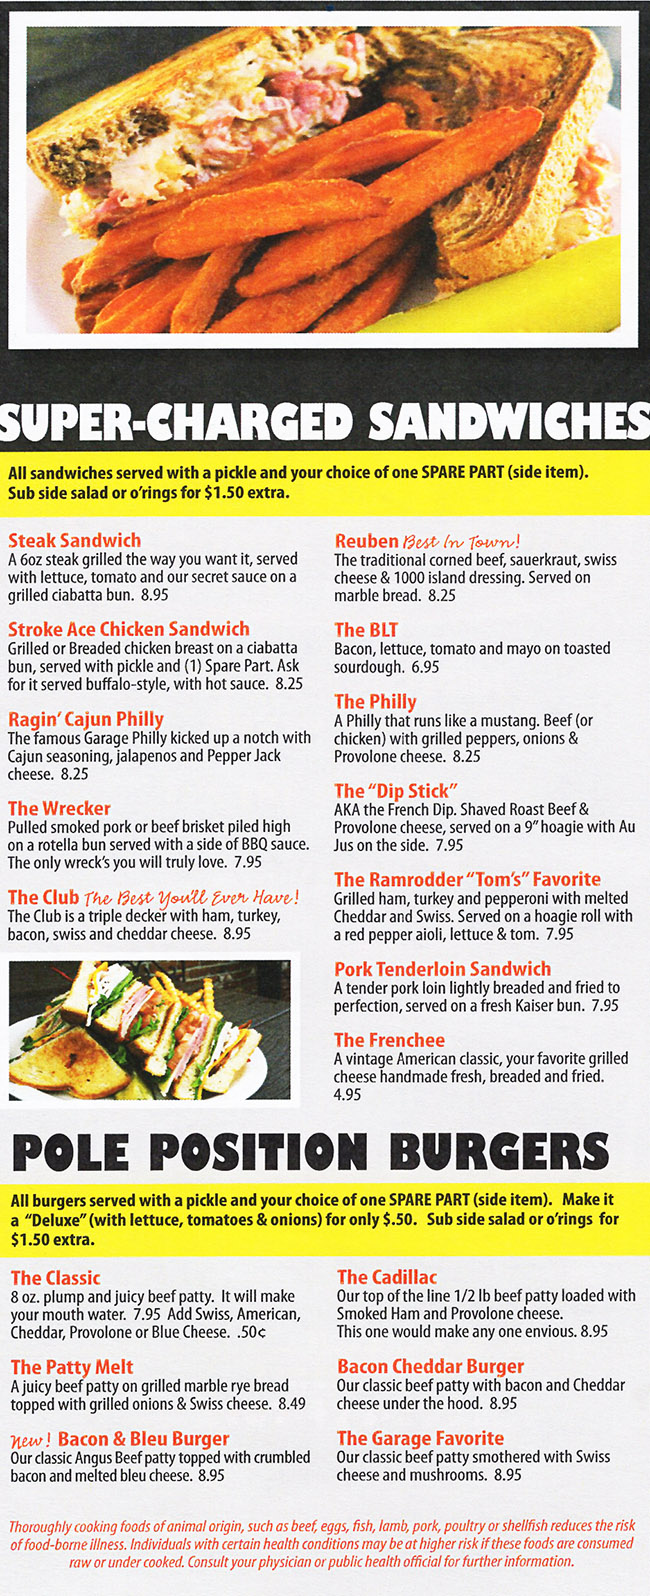 The Garage Sports Bar & Grill Delivery Menu - With Prices ...